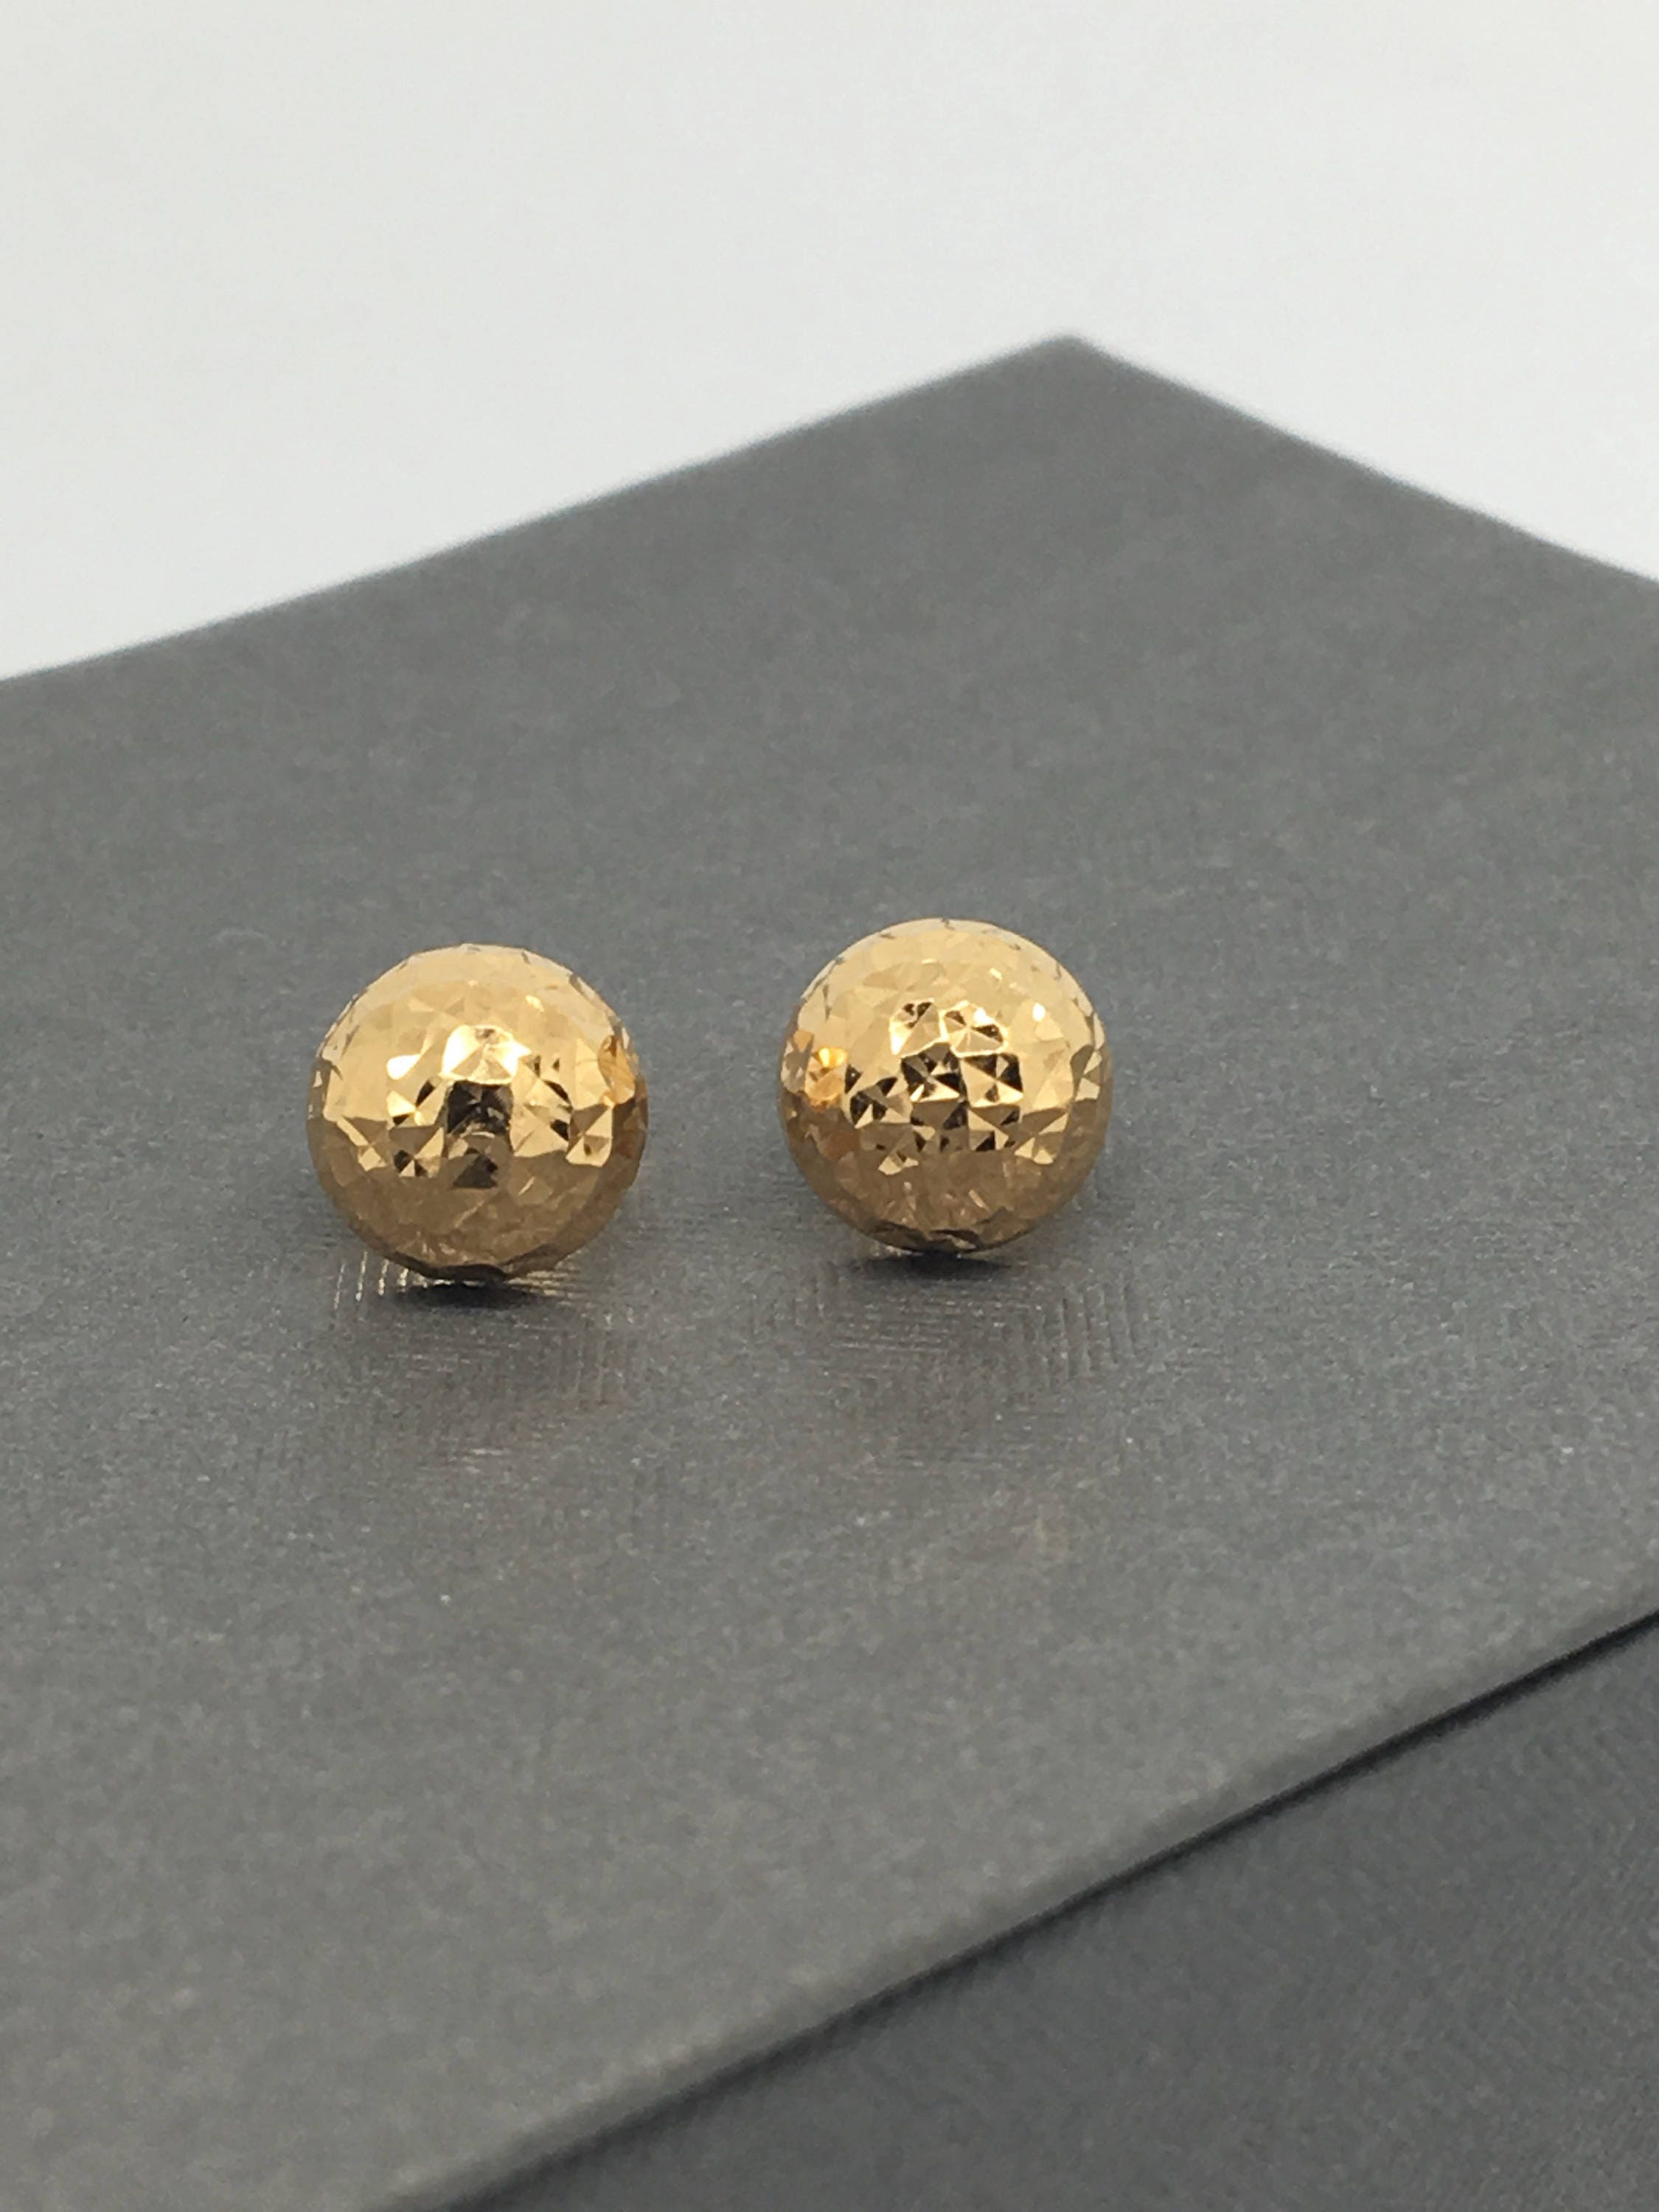 Details about   Real 14kt Yellow Gold Polished Half Ball Post Ear